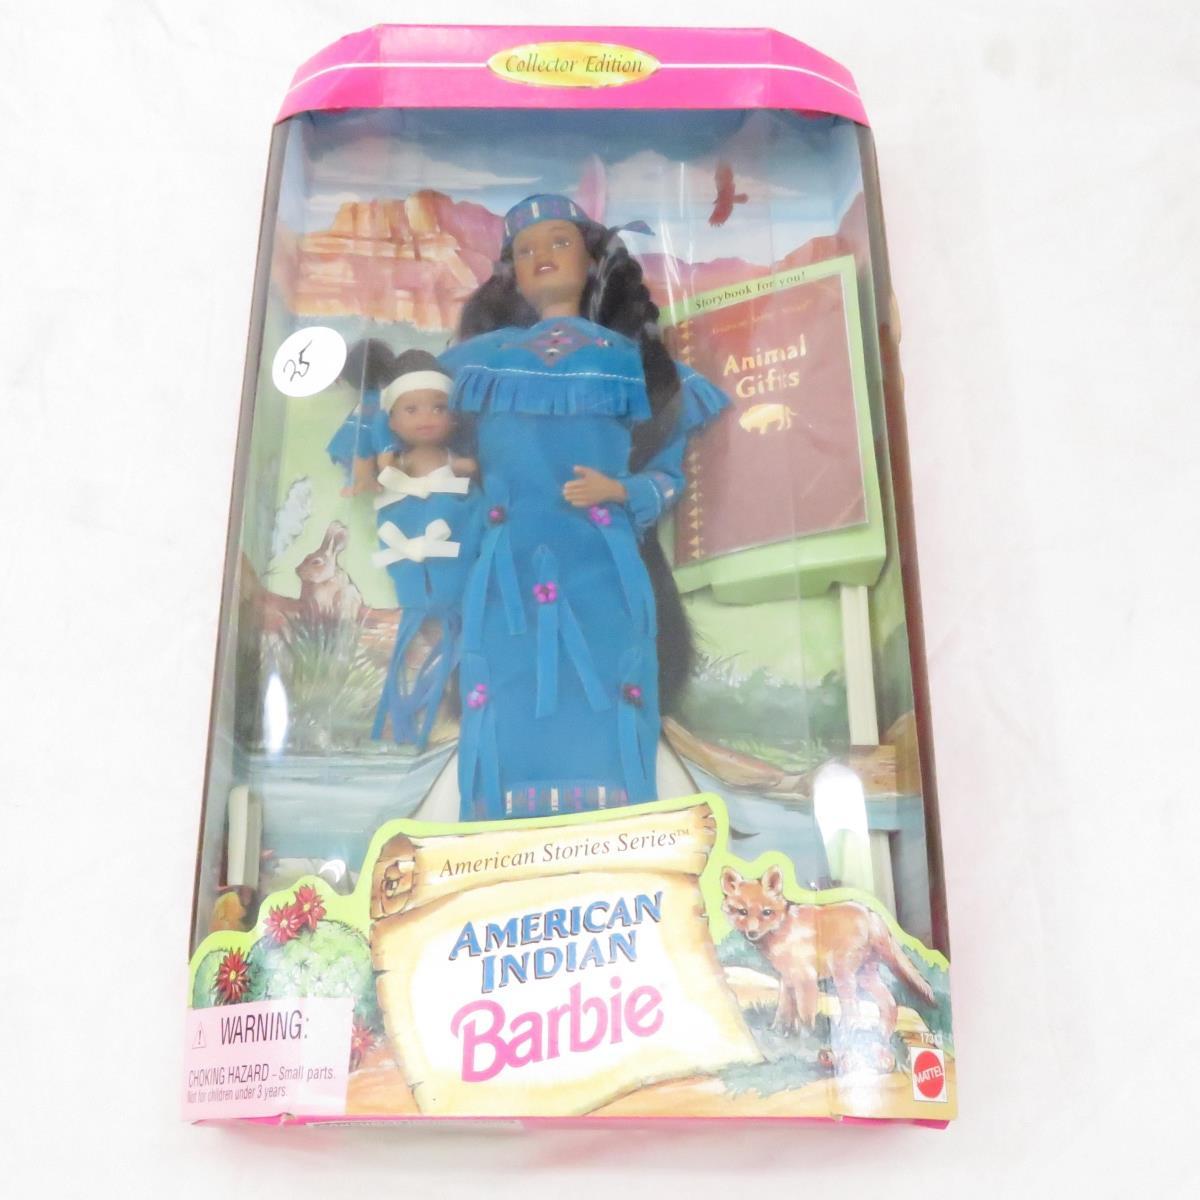 8 Vintage Dolls of the World Barbie Dolls in Box